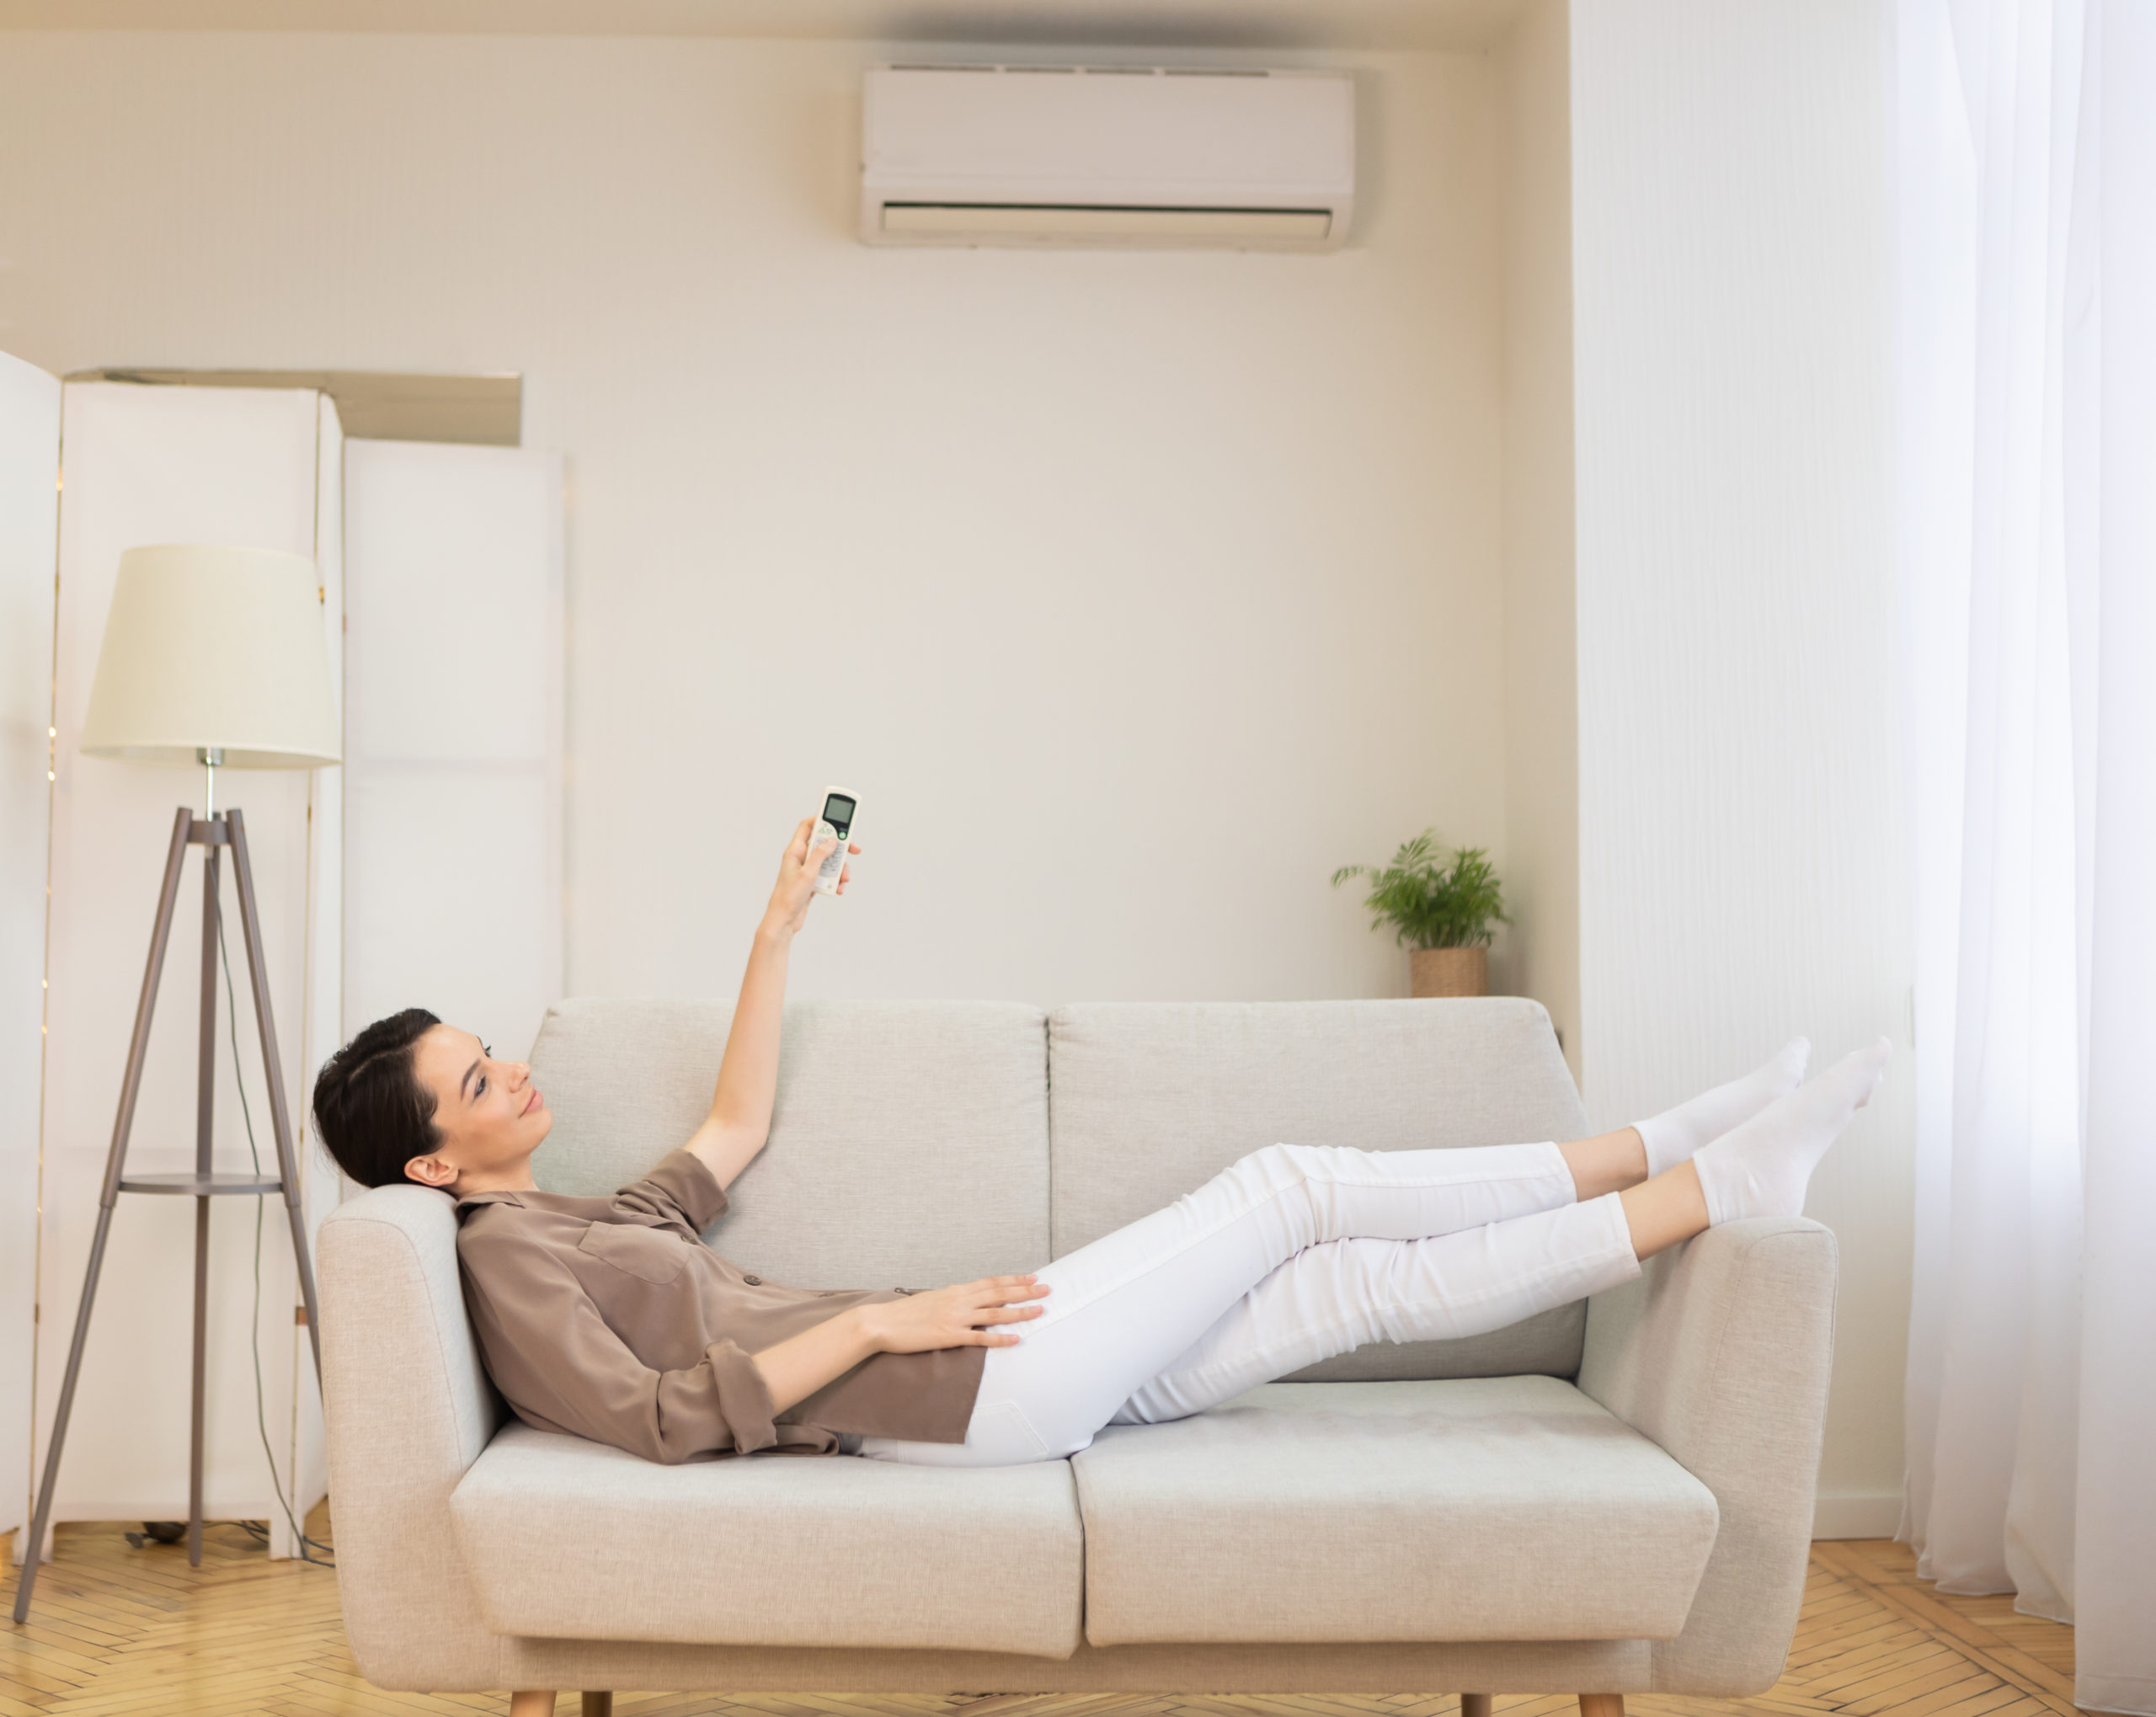 Girl holding remote control relaxing under the air conditioner, lying on couch